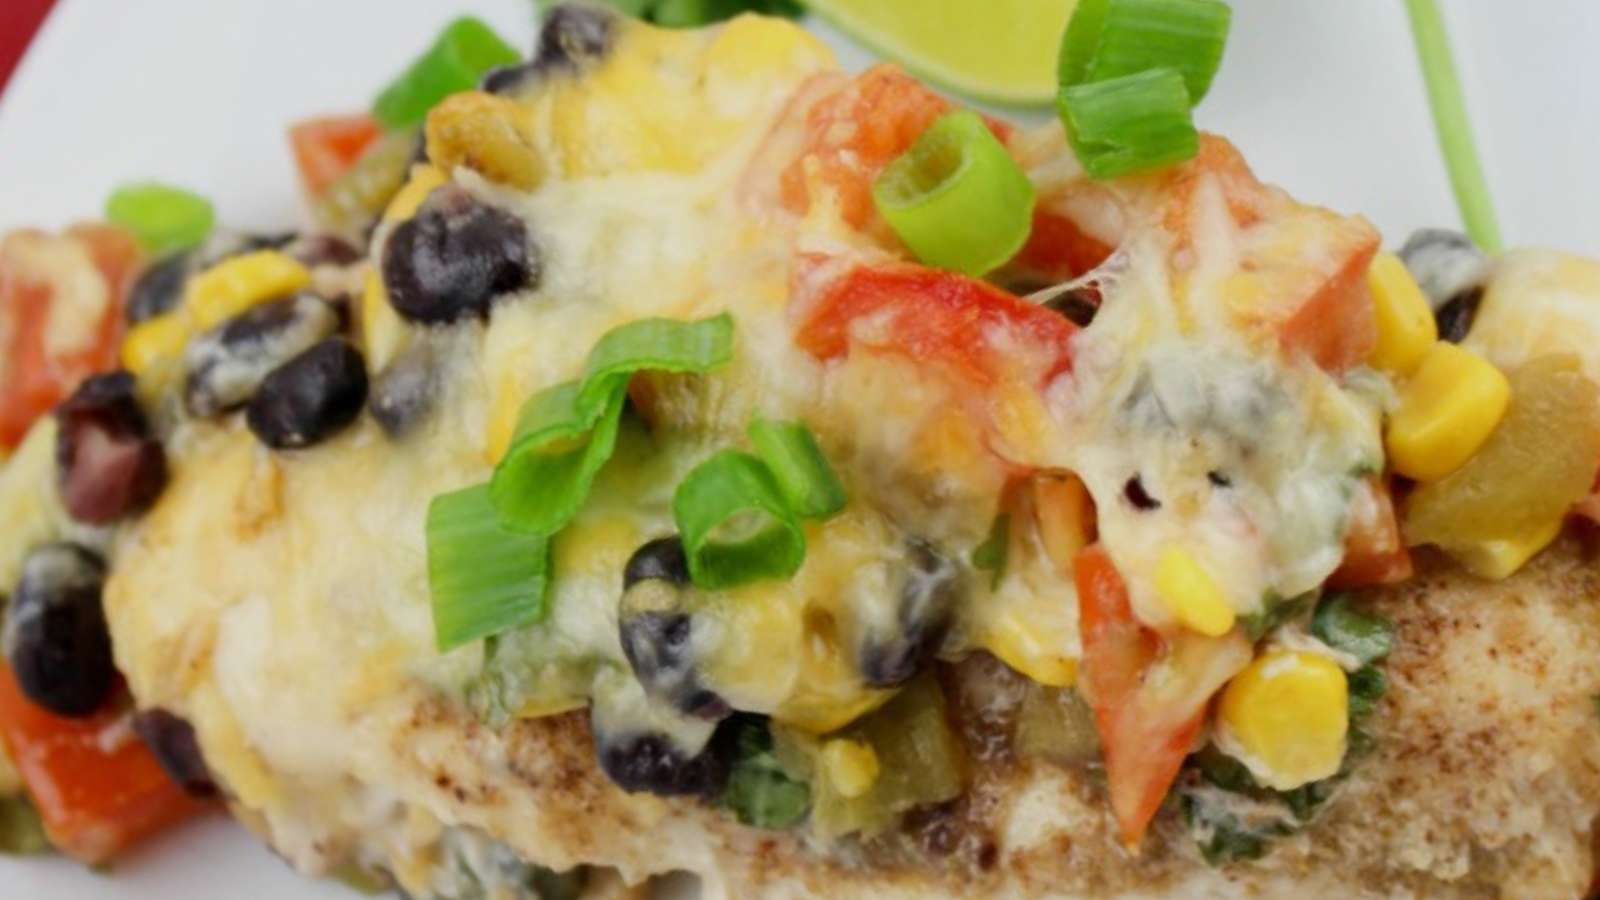 Southwest chicken enchiladas with black beans and tomatoes.